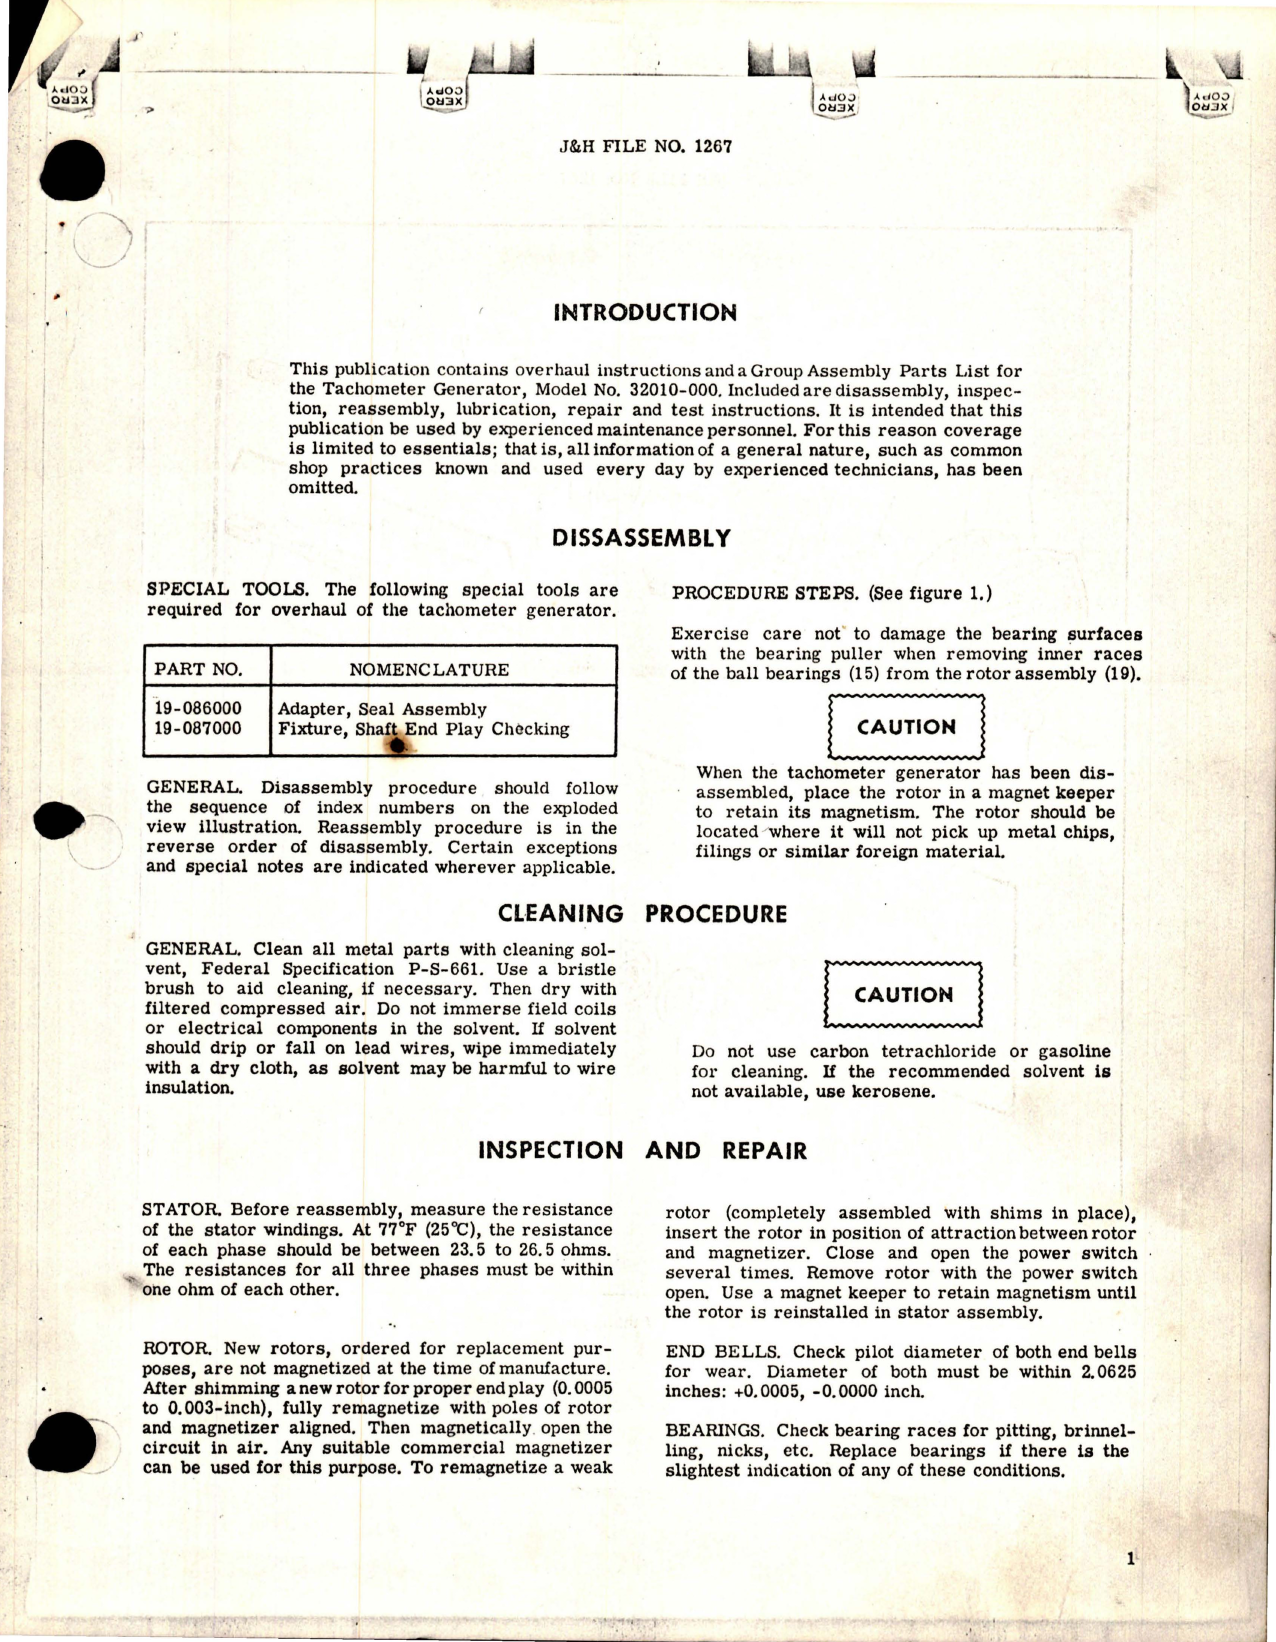 Sample page 5 from AirCorps Library document: Overhaul Instructions with Parts Catalog for Tachometer Generator - Model 32010-000